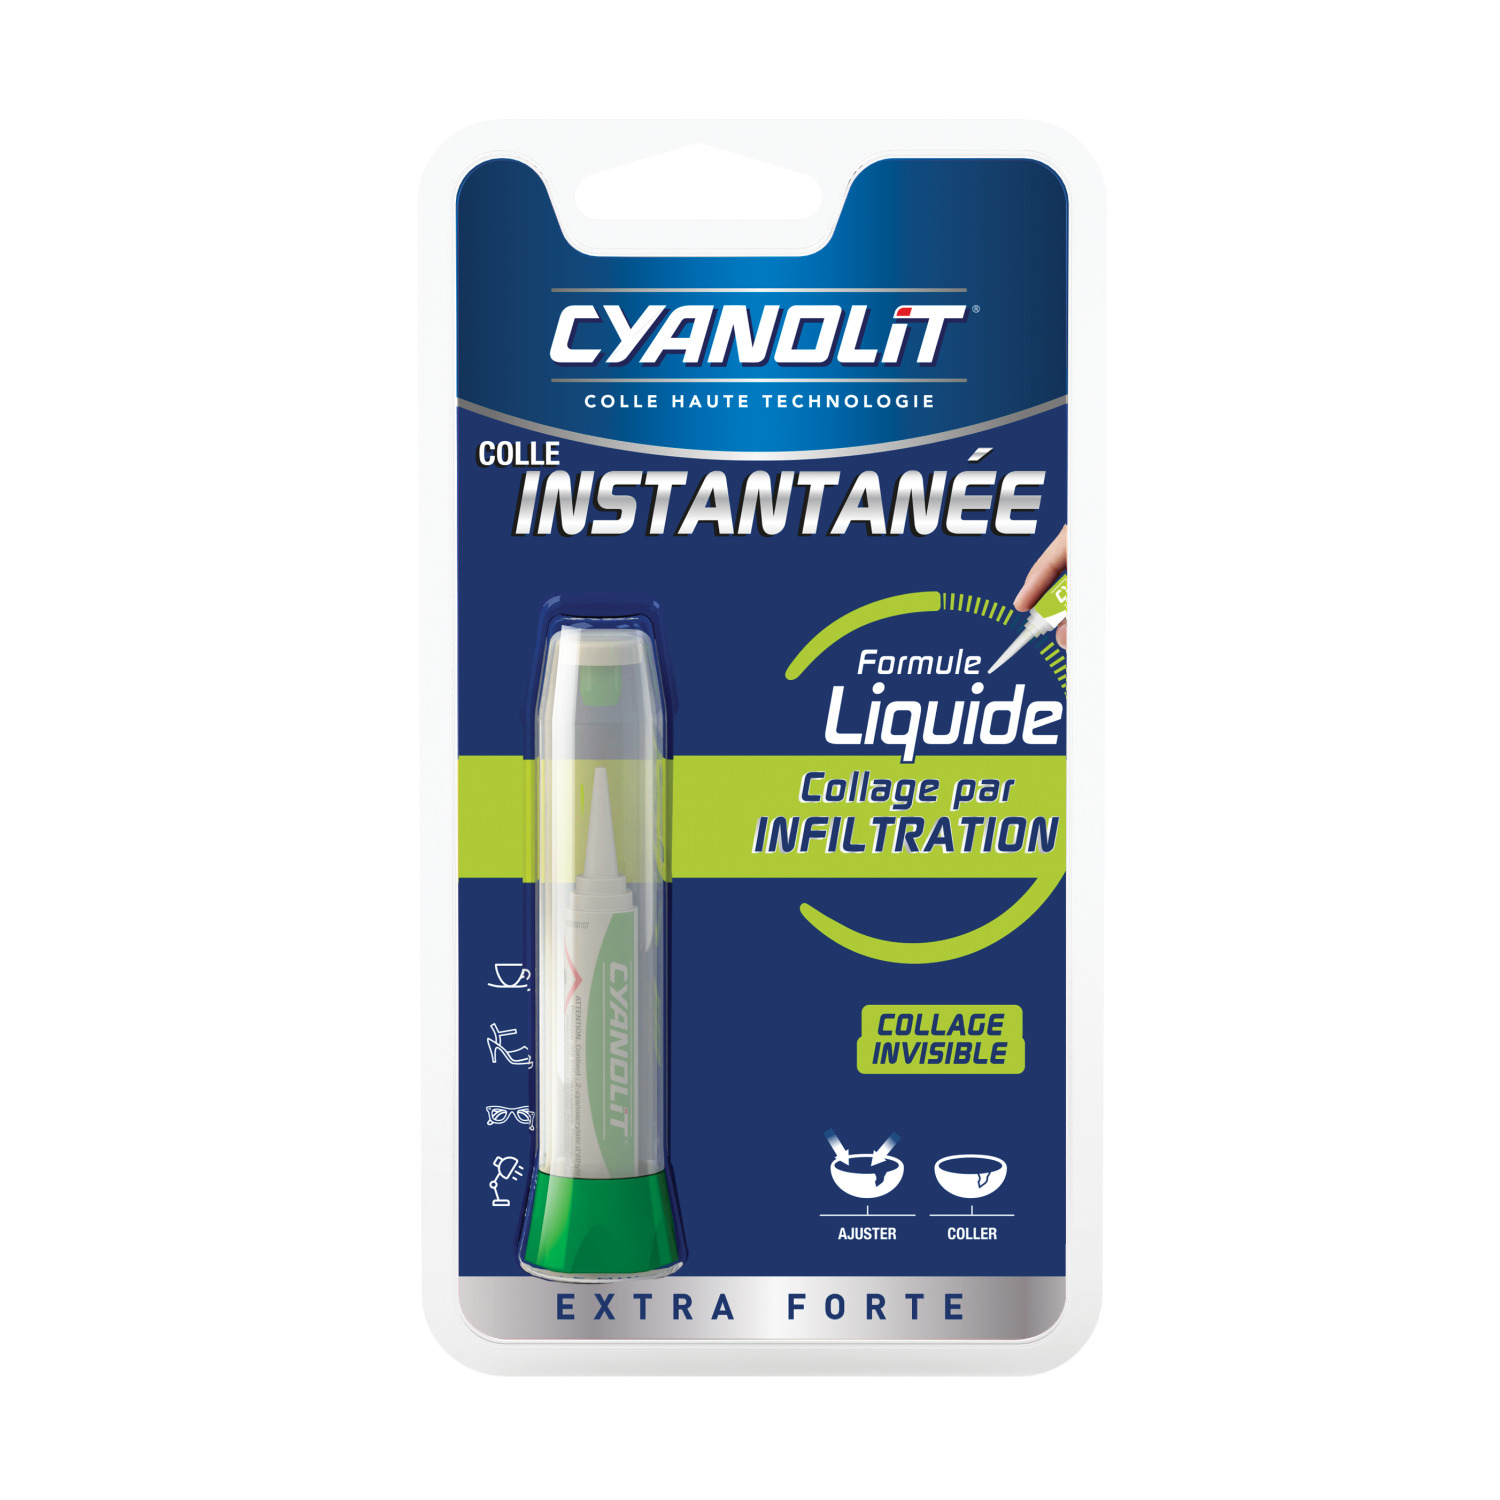 CYANOLIT Colle Instantanée 5g 203968 Extreme Power - Ecomedia AG